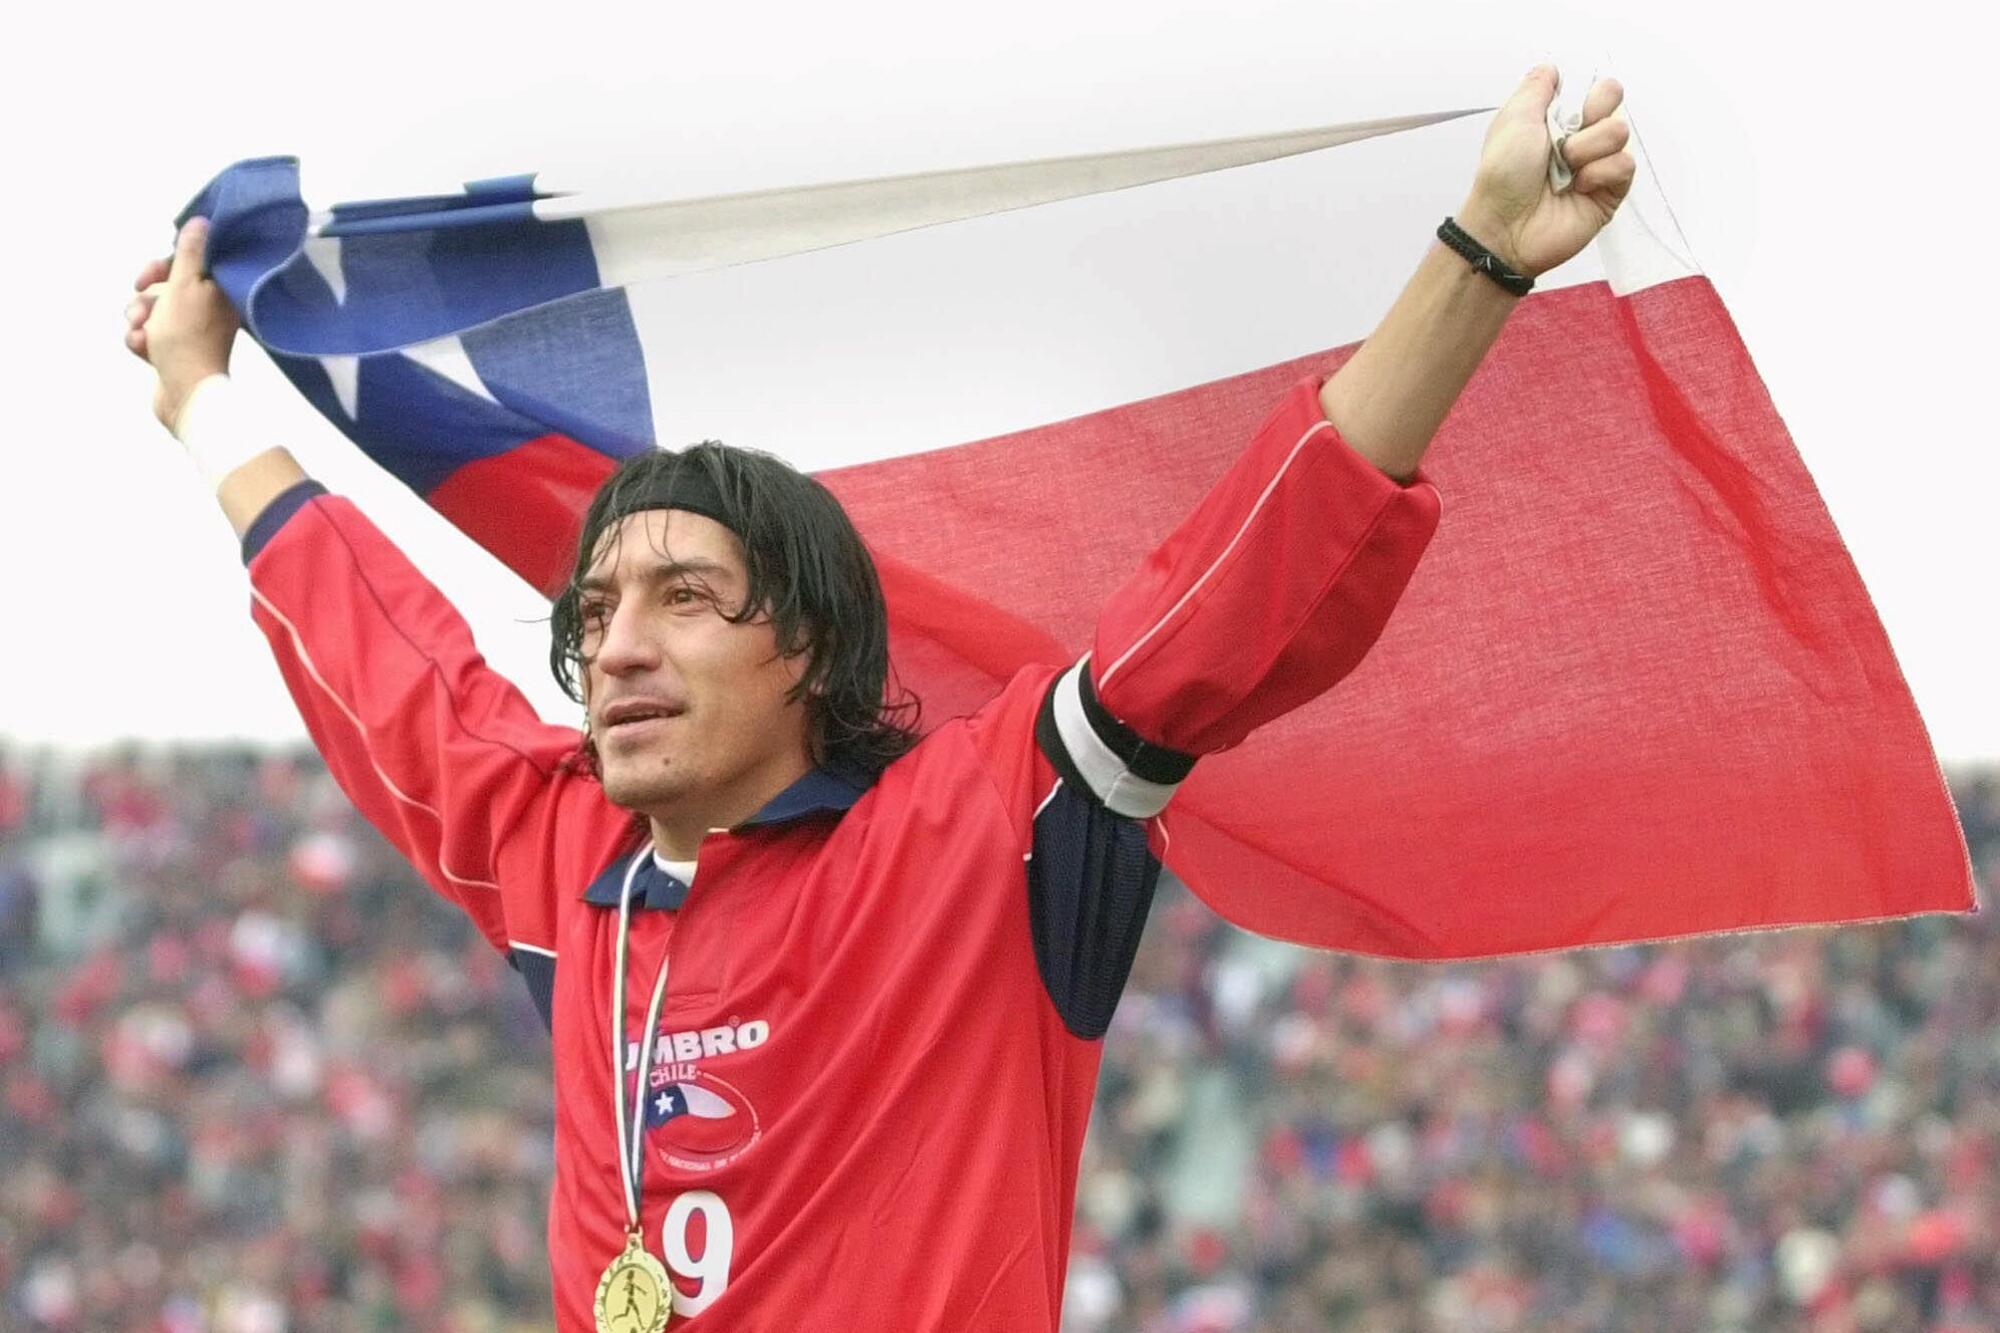 Chilean star soccer player Ivan Zamorano holds a Chilean flag after defeating France's national soccer team 2-1 in Santiago